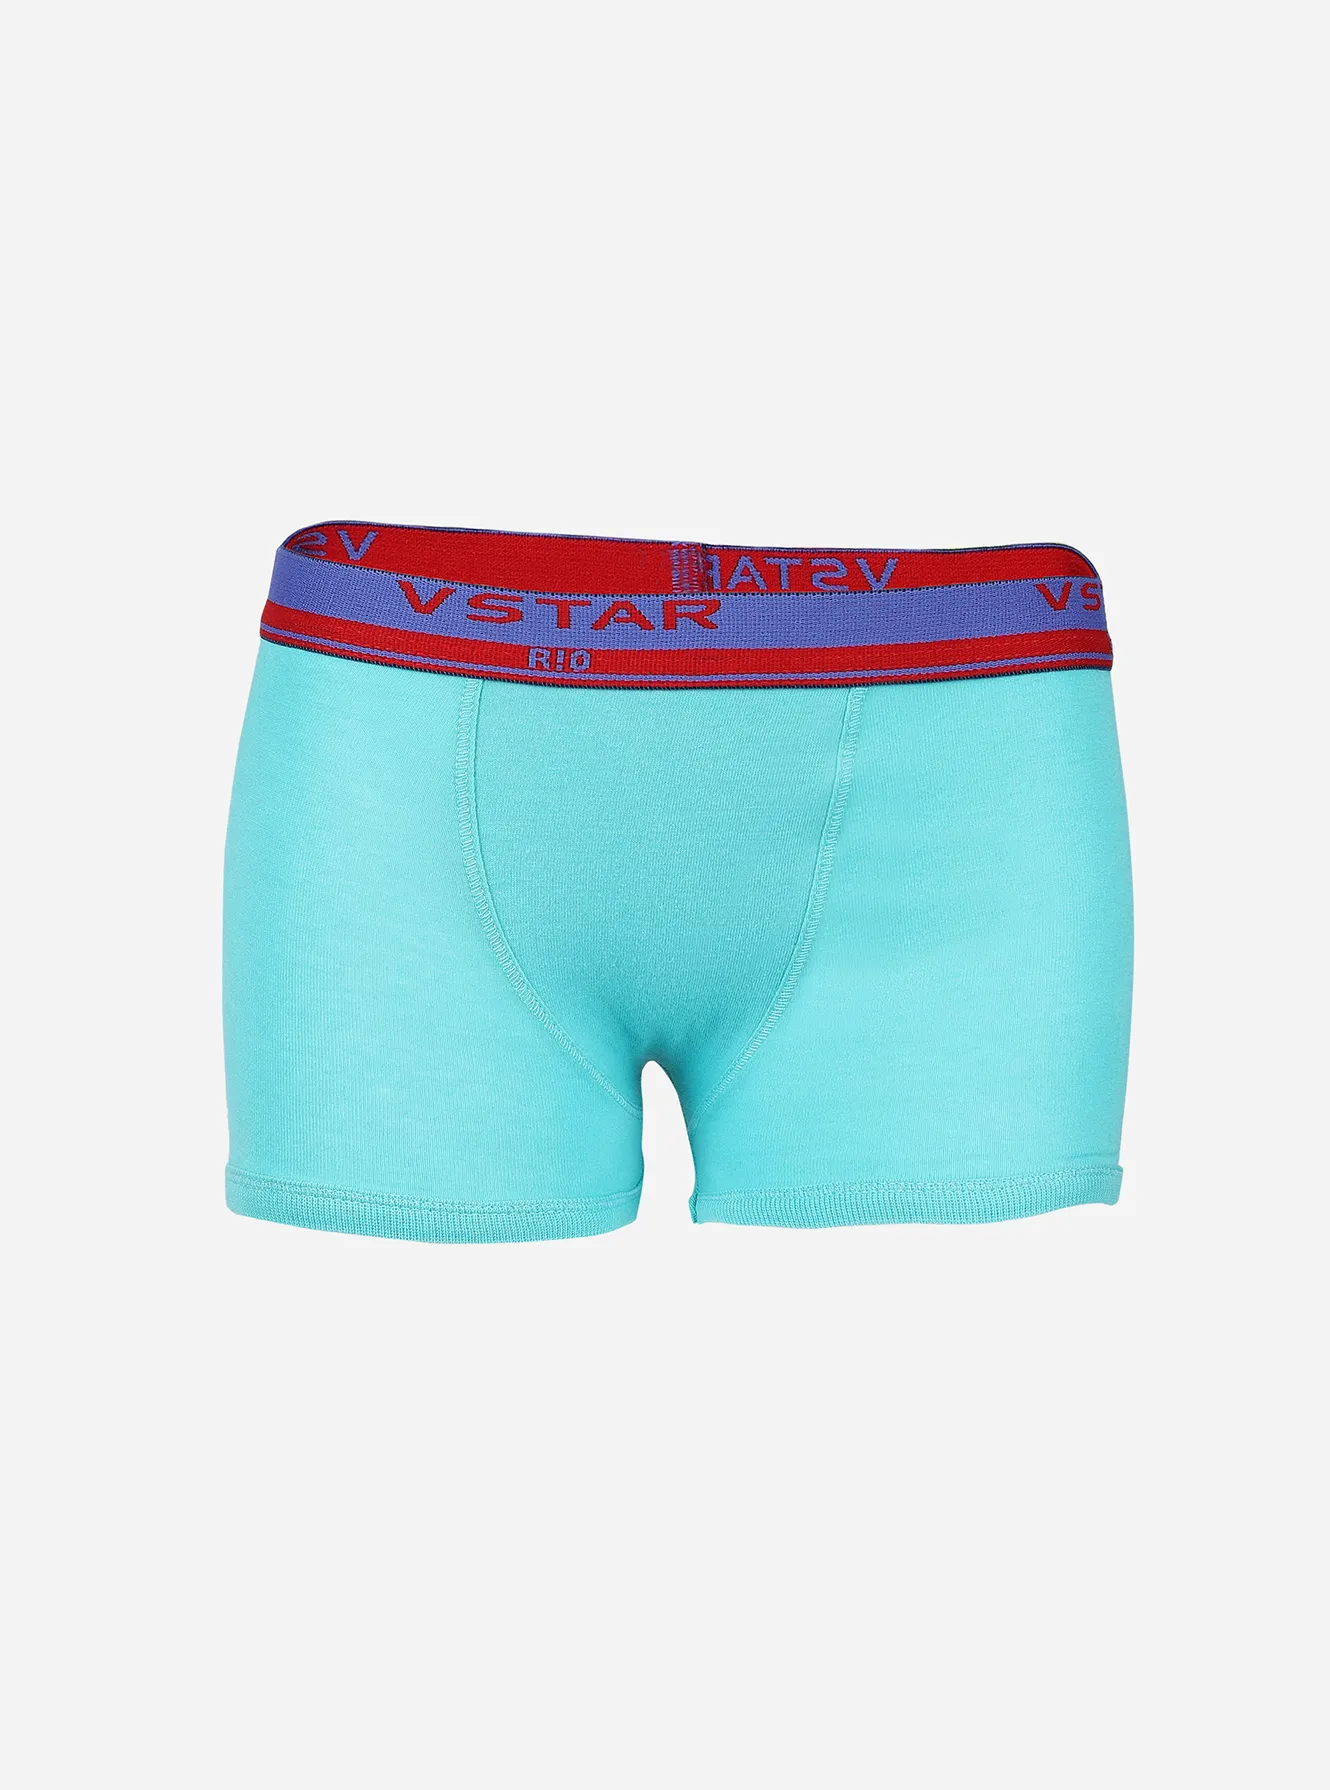 Premium cotton brief with outer elastic waistband